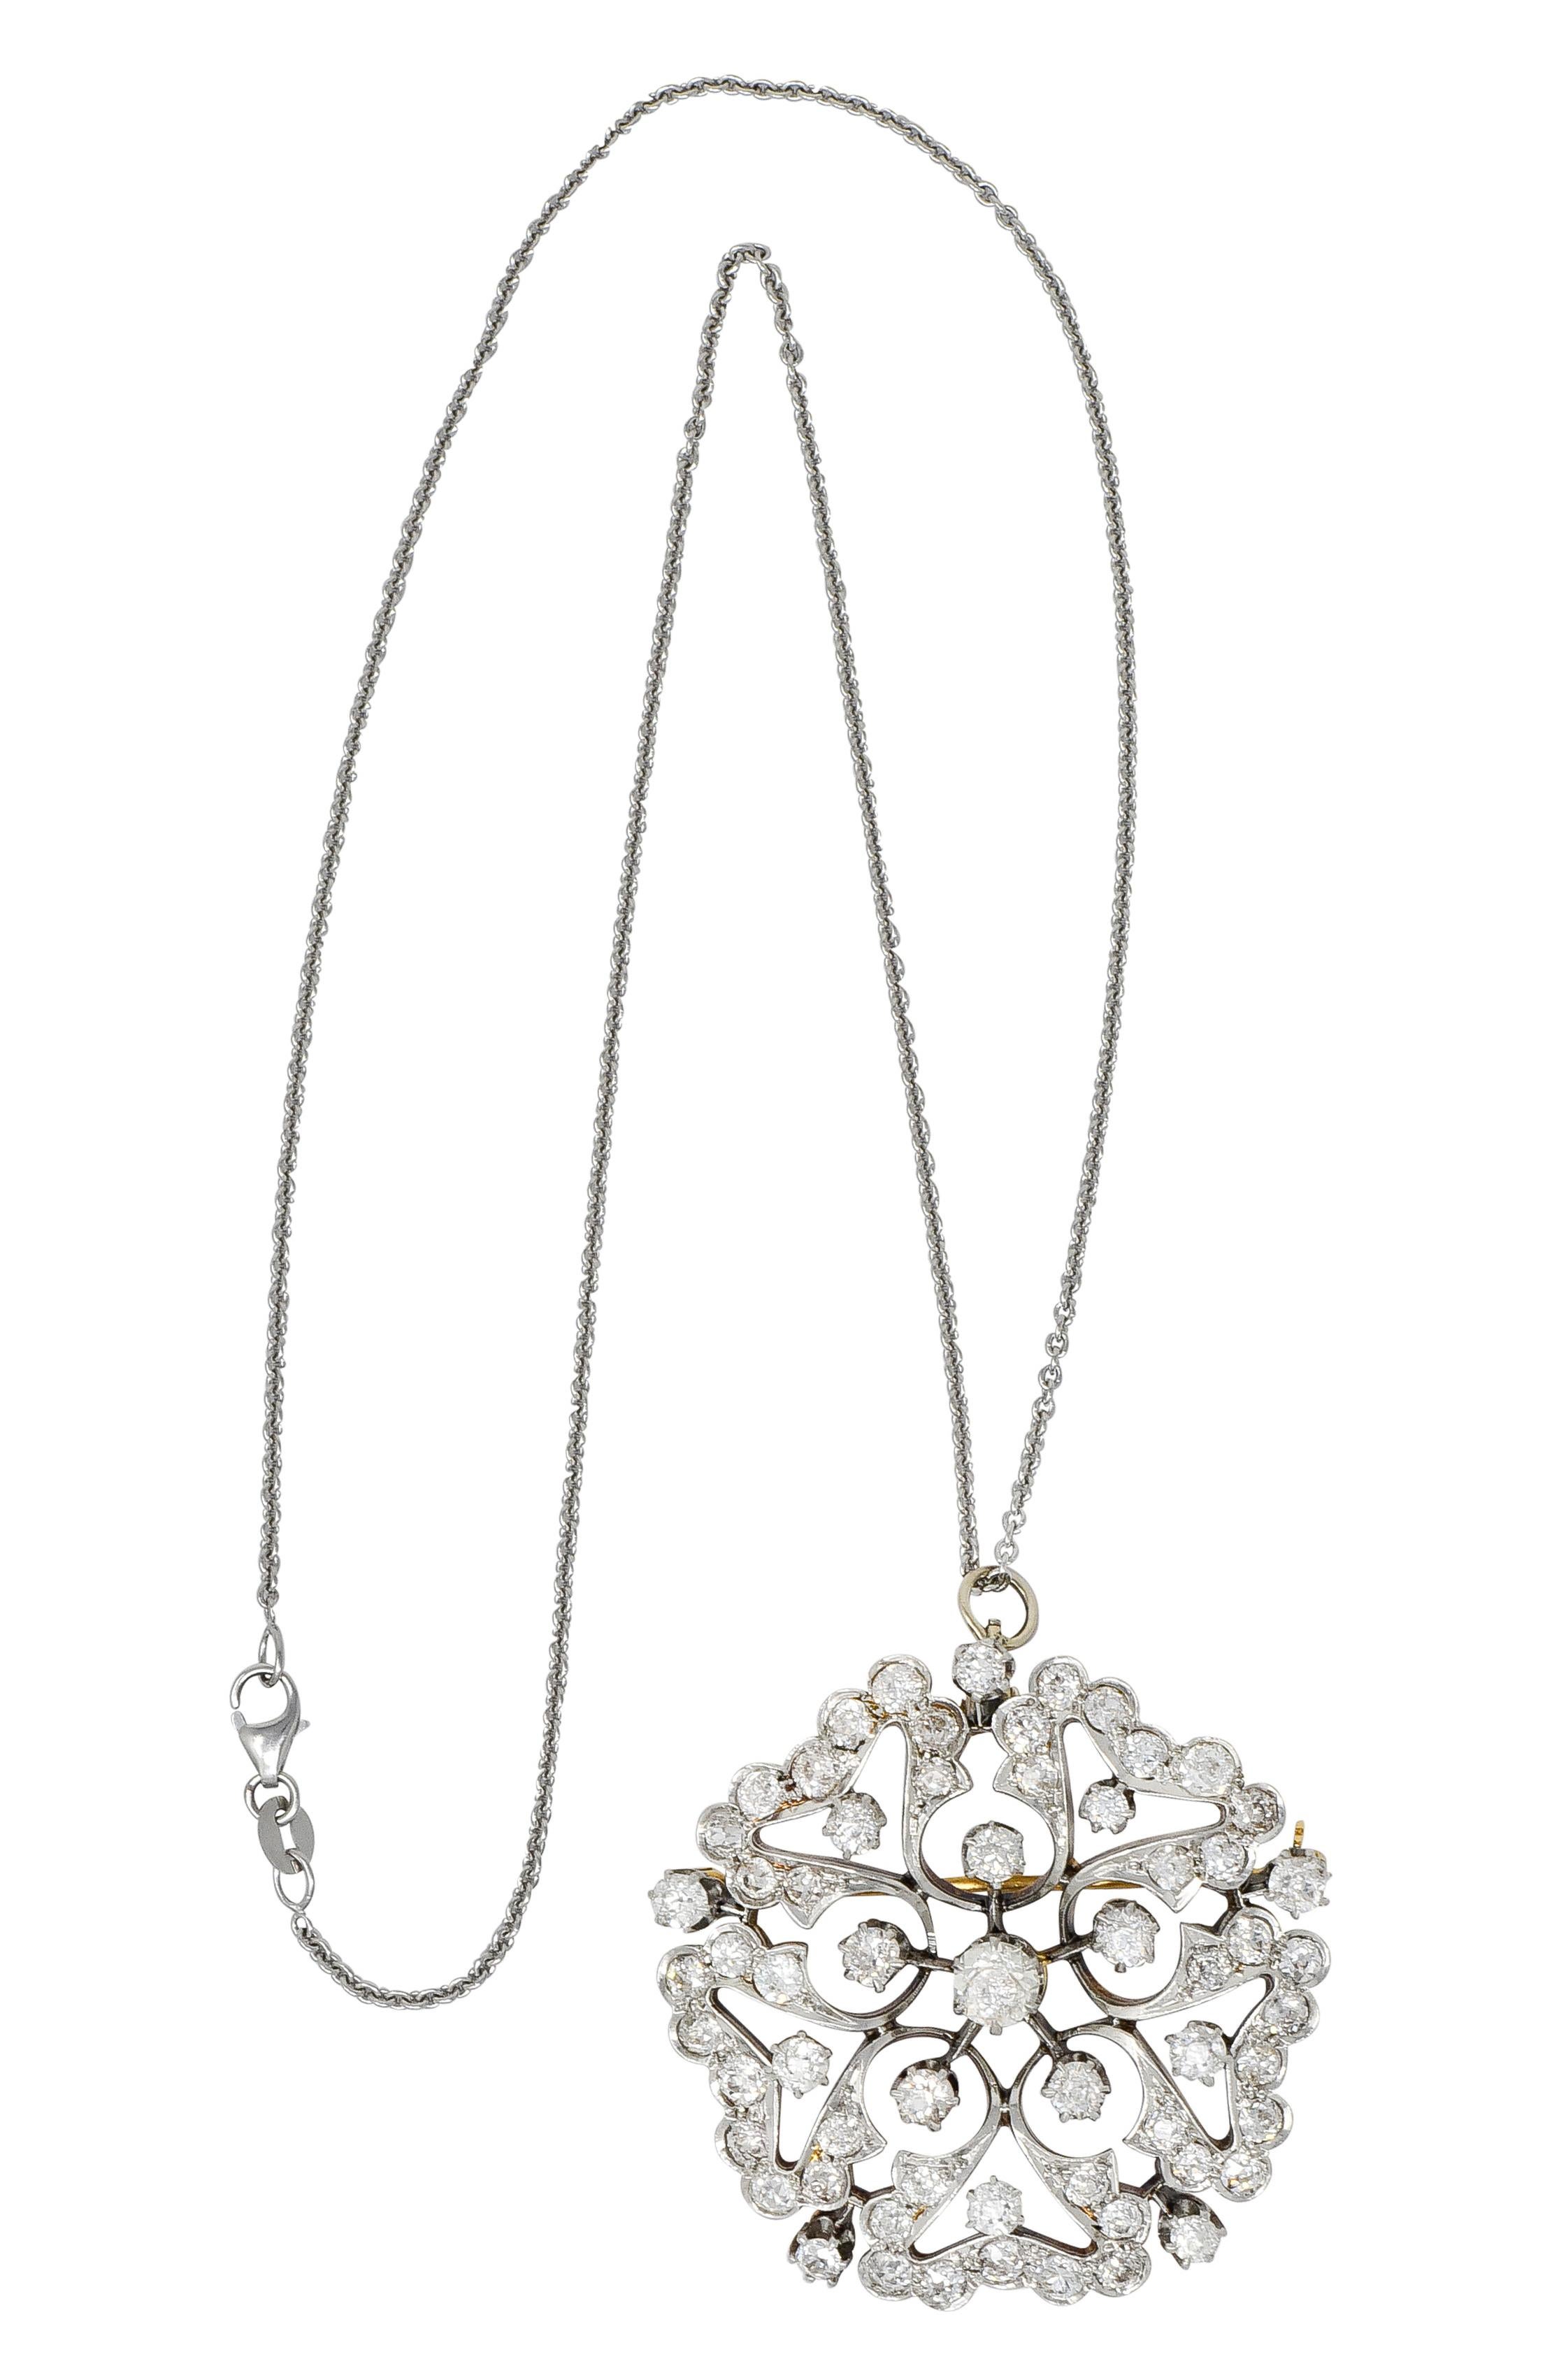 Centering a circular pendant designed as an intricately pierced radiating floral motif with scalloped petals

Set throughout by old mine and old European cut diamonds weighing approximately 6 carats total; H to K color with SI and I